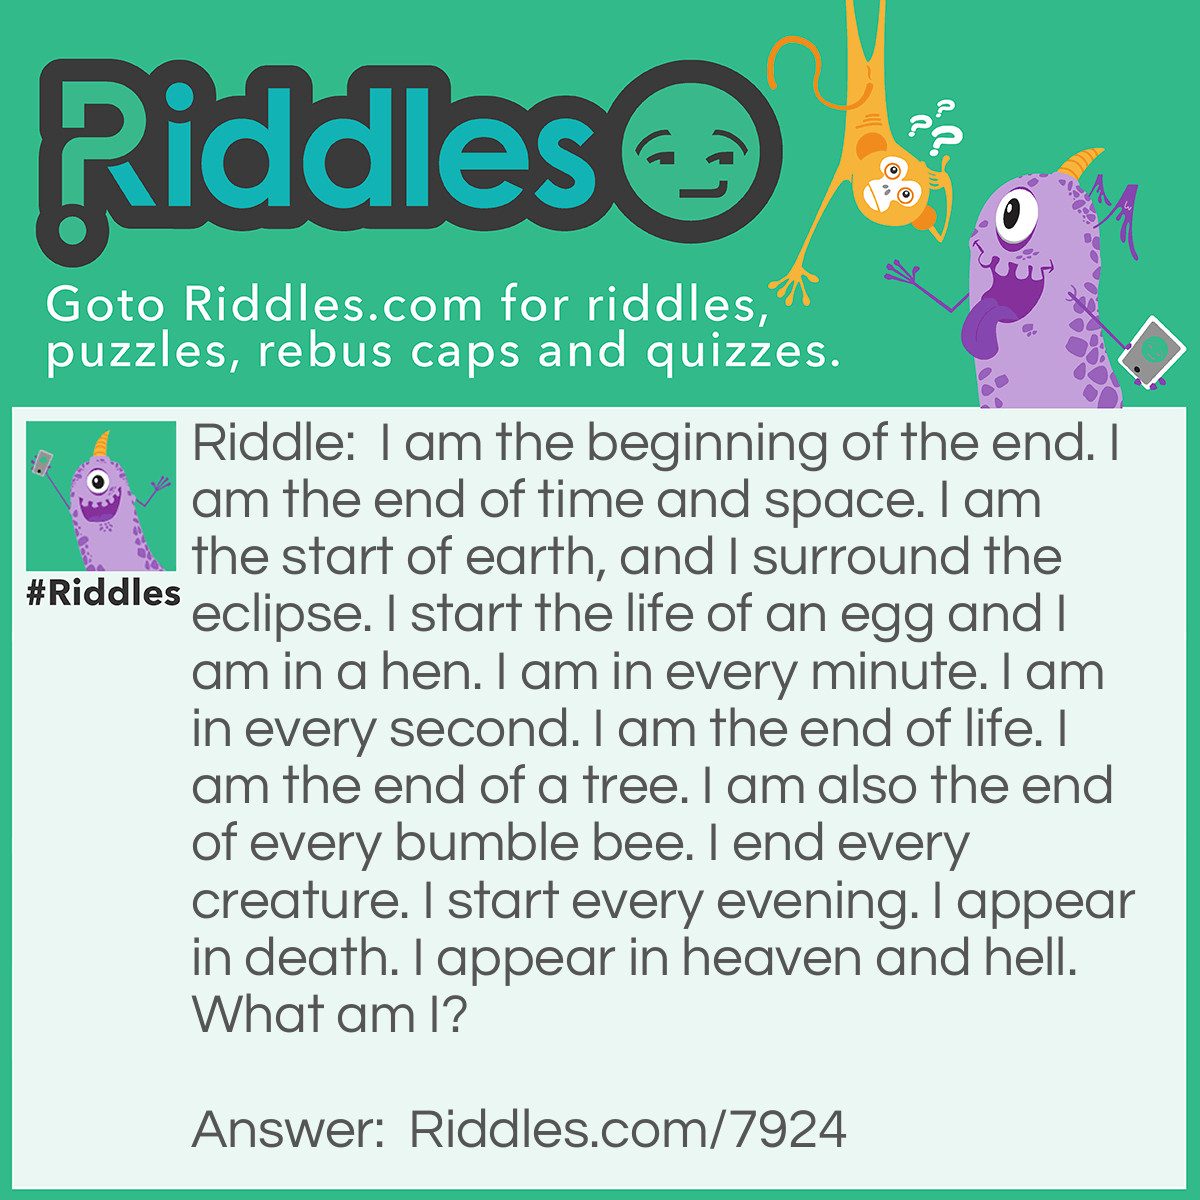 Riddle: I am the beginning of the end. I am the end of time and space. I am the start of earth, and I surround the eclipse. I start the life of an egg and I am in a hen. I am in every minute. I am in every second. I am the end of life. I am the end of a tree. I am also the end of every bumble bee. I end every creature. I start every evening. I appear in death. I appear in heaven and hell. What am I? Answer: The letter E. End. timE and spacE. Earth. EclipsE. Egg. hEn. minutE. sEcond. lifE. trEE. bumble bEE. every creaturE. Evening. dEath. hEavEn and hEll.